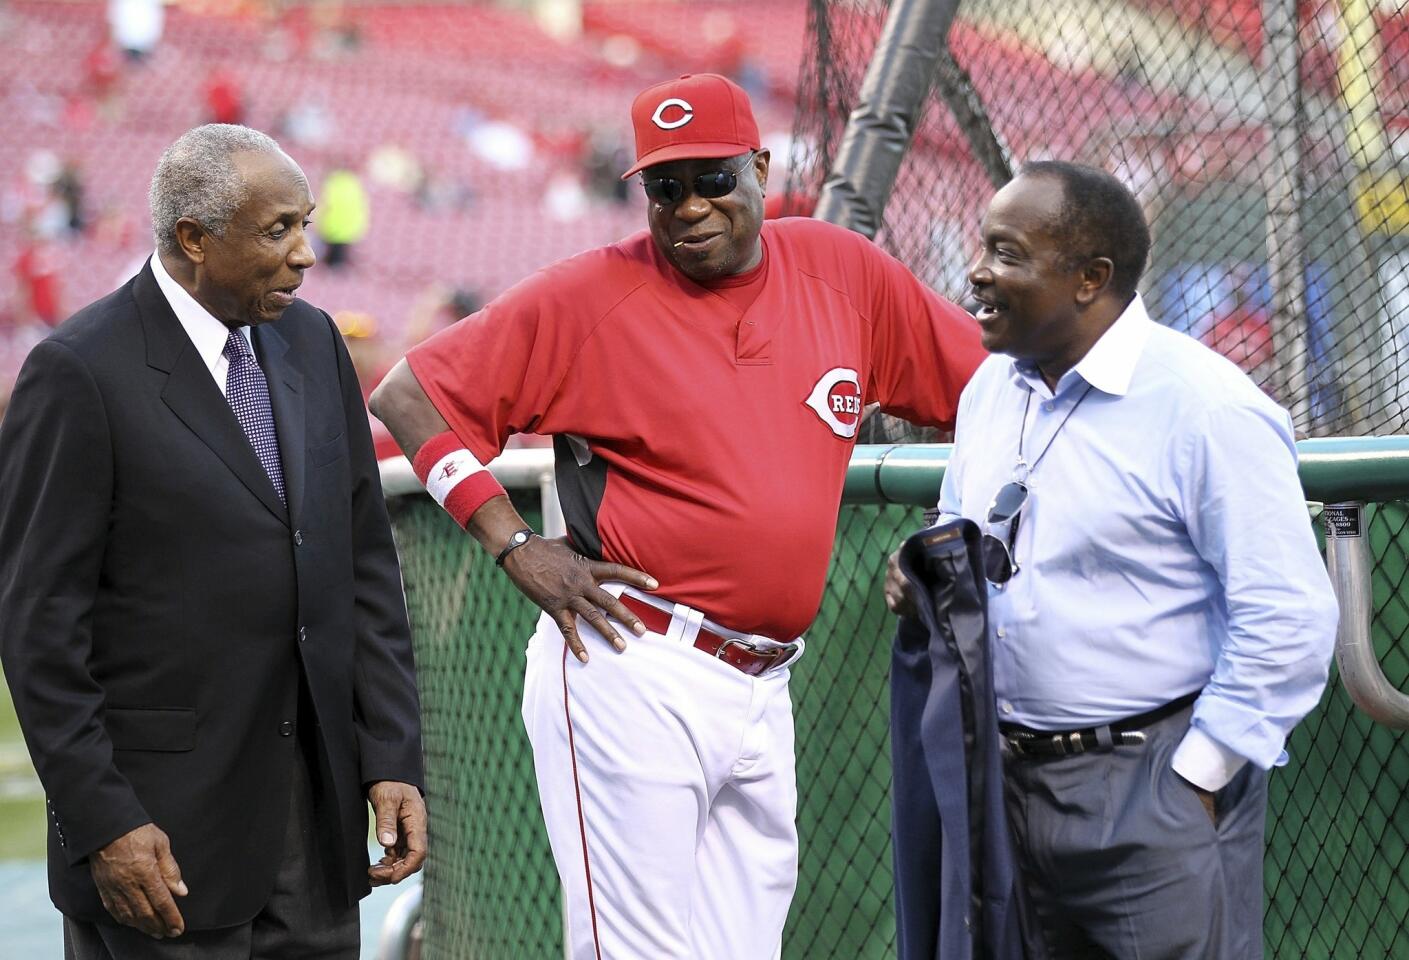 Frank Robinson, left, Cincinnati Reds manager Dusty Baker and Joe Morgan talk during batting practice before the start of Game 3 of the NLDS against the Philadelphia Phillies at Great American Ball Park on Oct. 10, 2010, in Cincinnati.